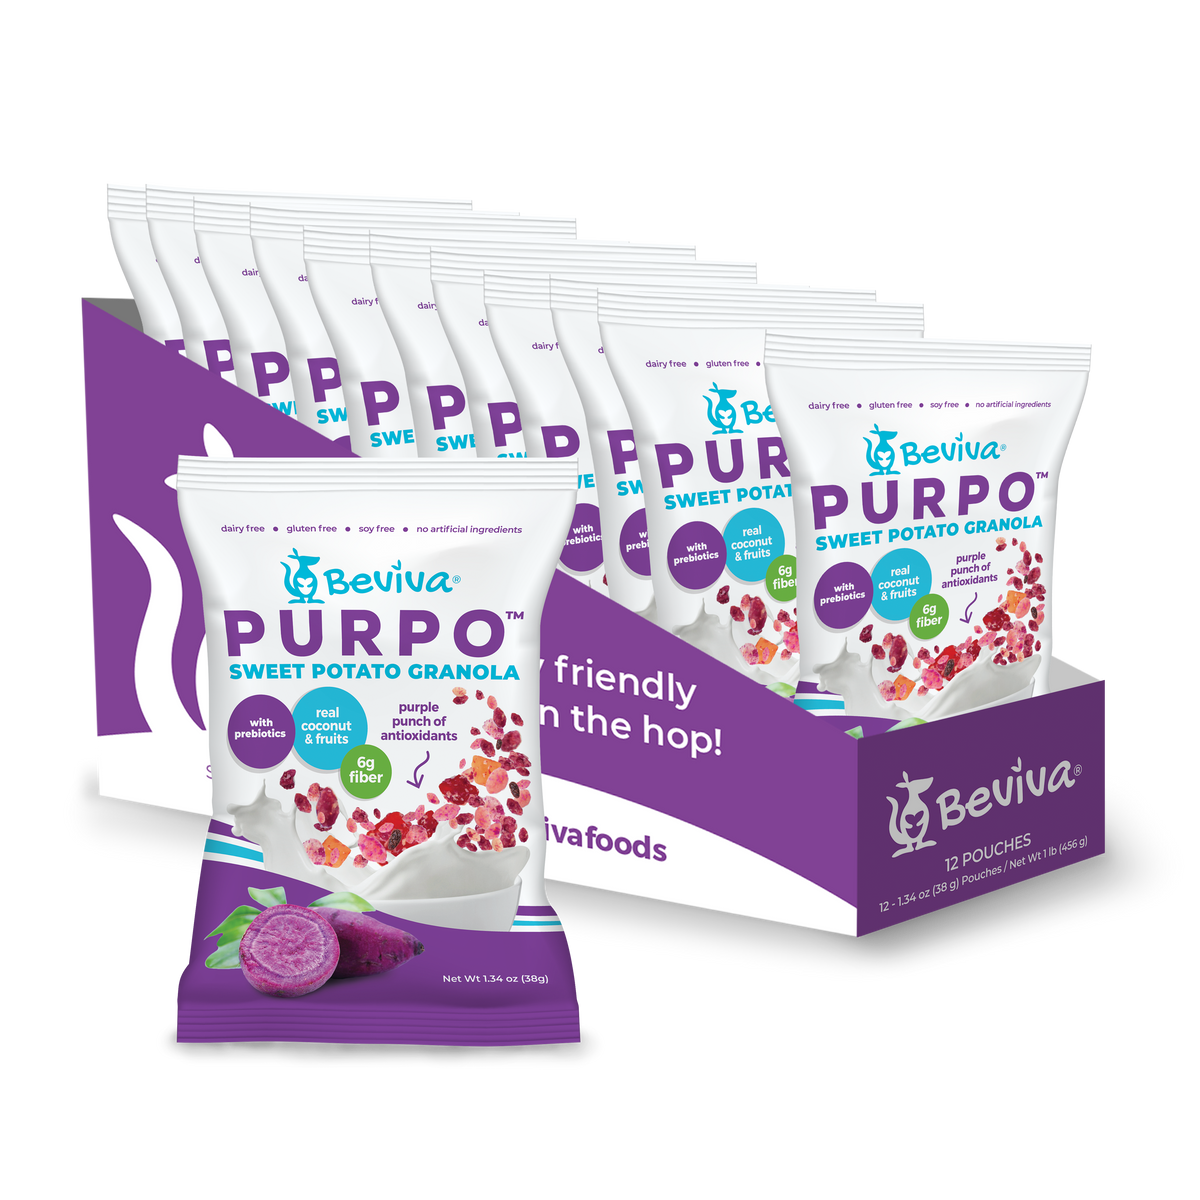 [Beviva] PURPO Granola Pouch I 1.34 oz each I 8 Pack exclusive at